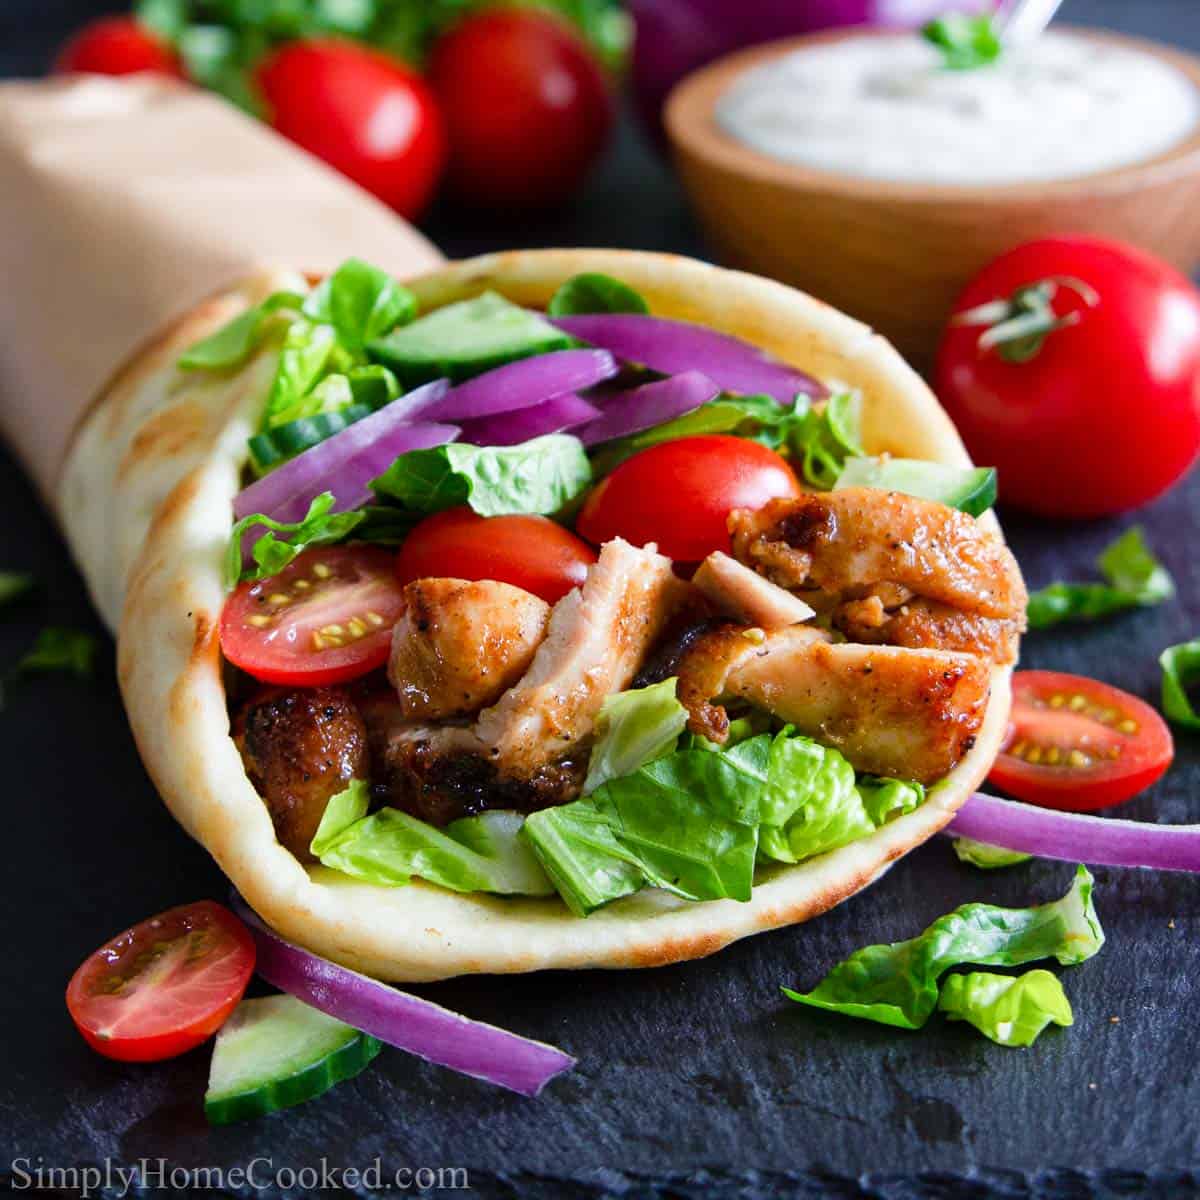 Chicken Shawarma - Simply Home Cooked